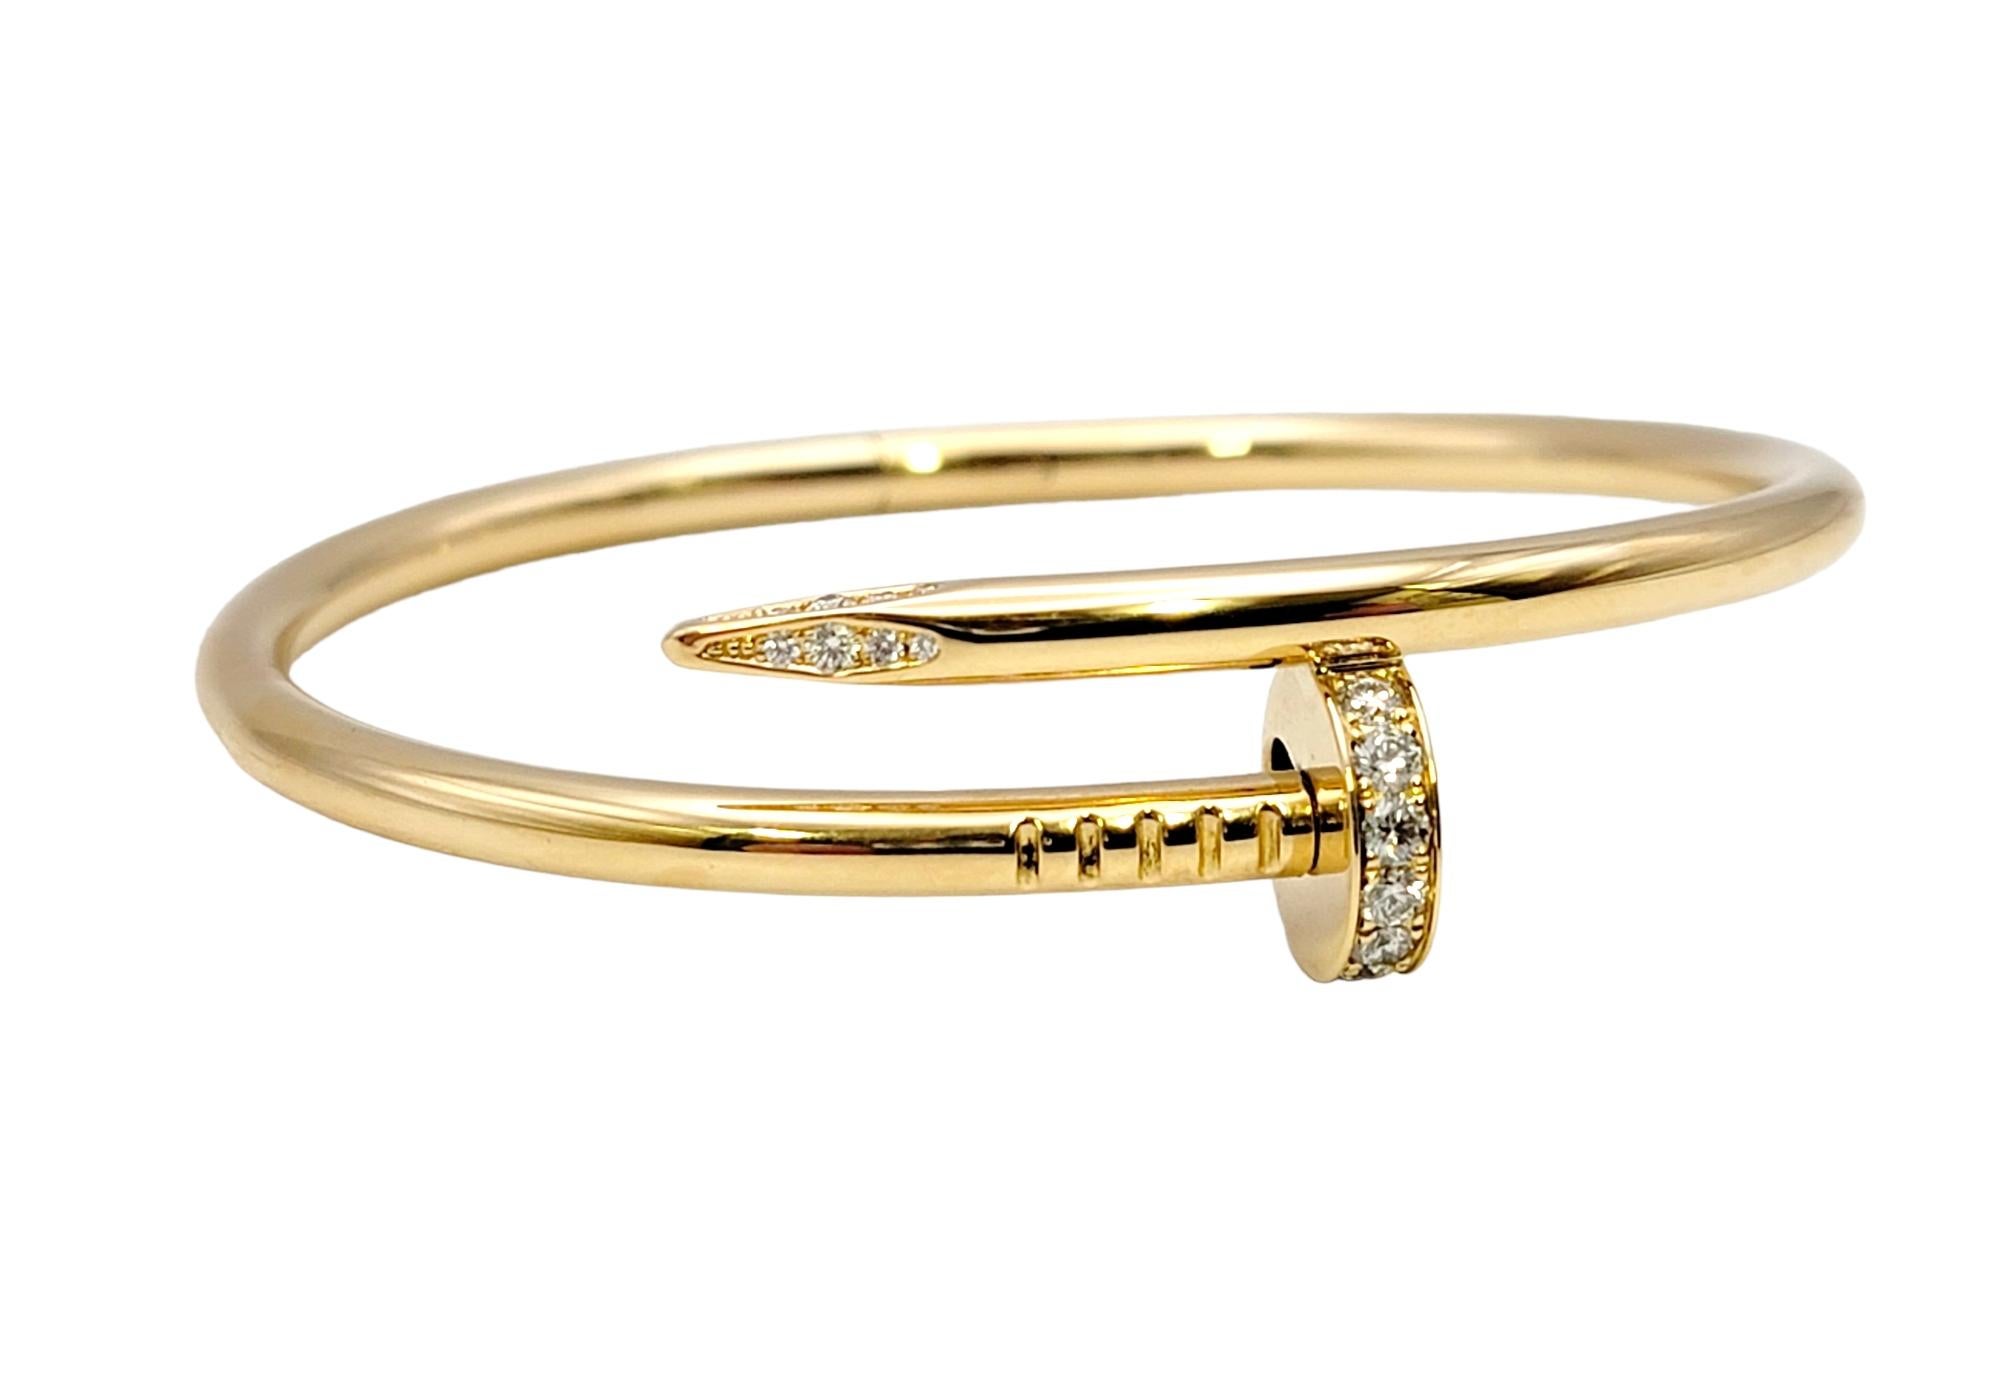 Contemporary Cartier Juste un Clou Yellow Gold Hinged Bangle Bracelet with Diamonds